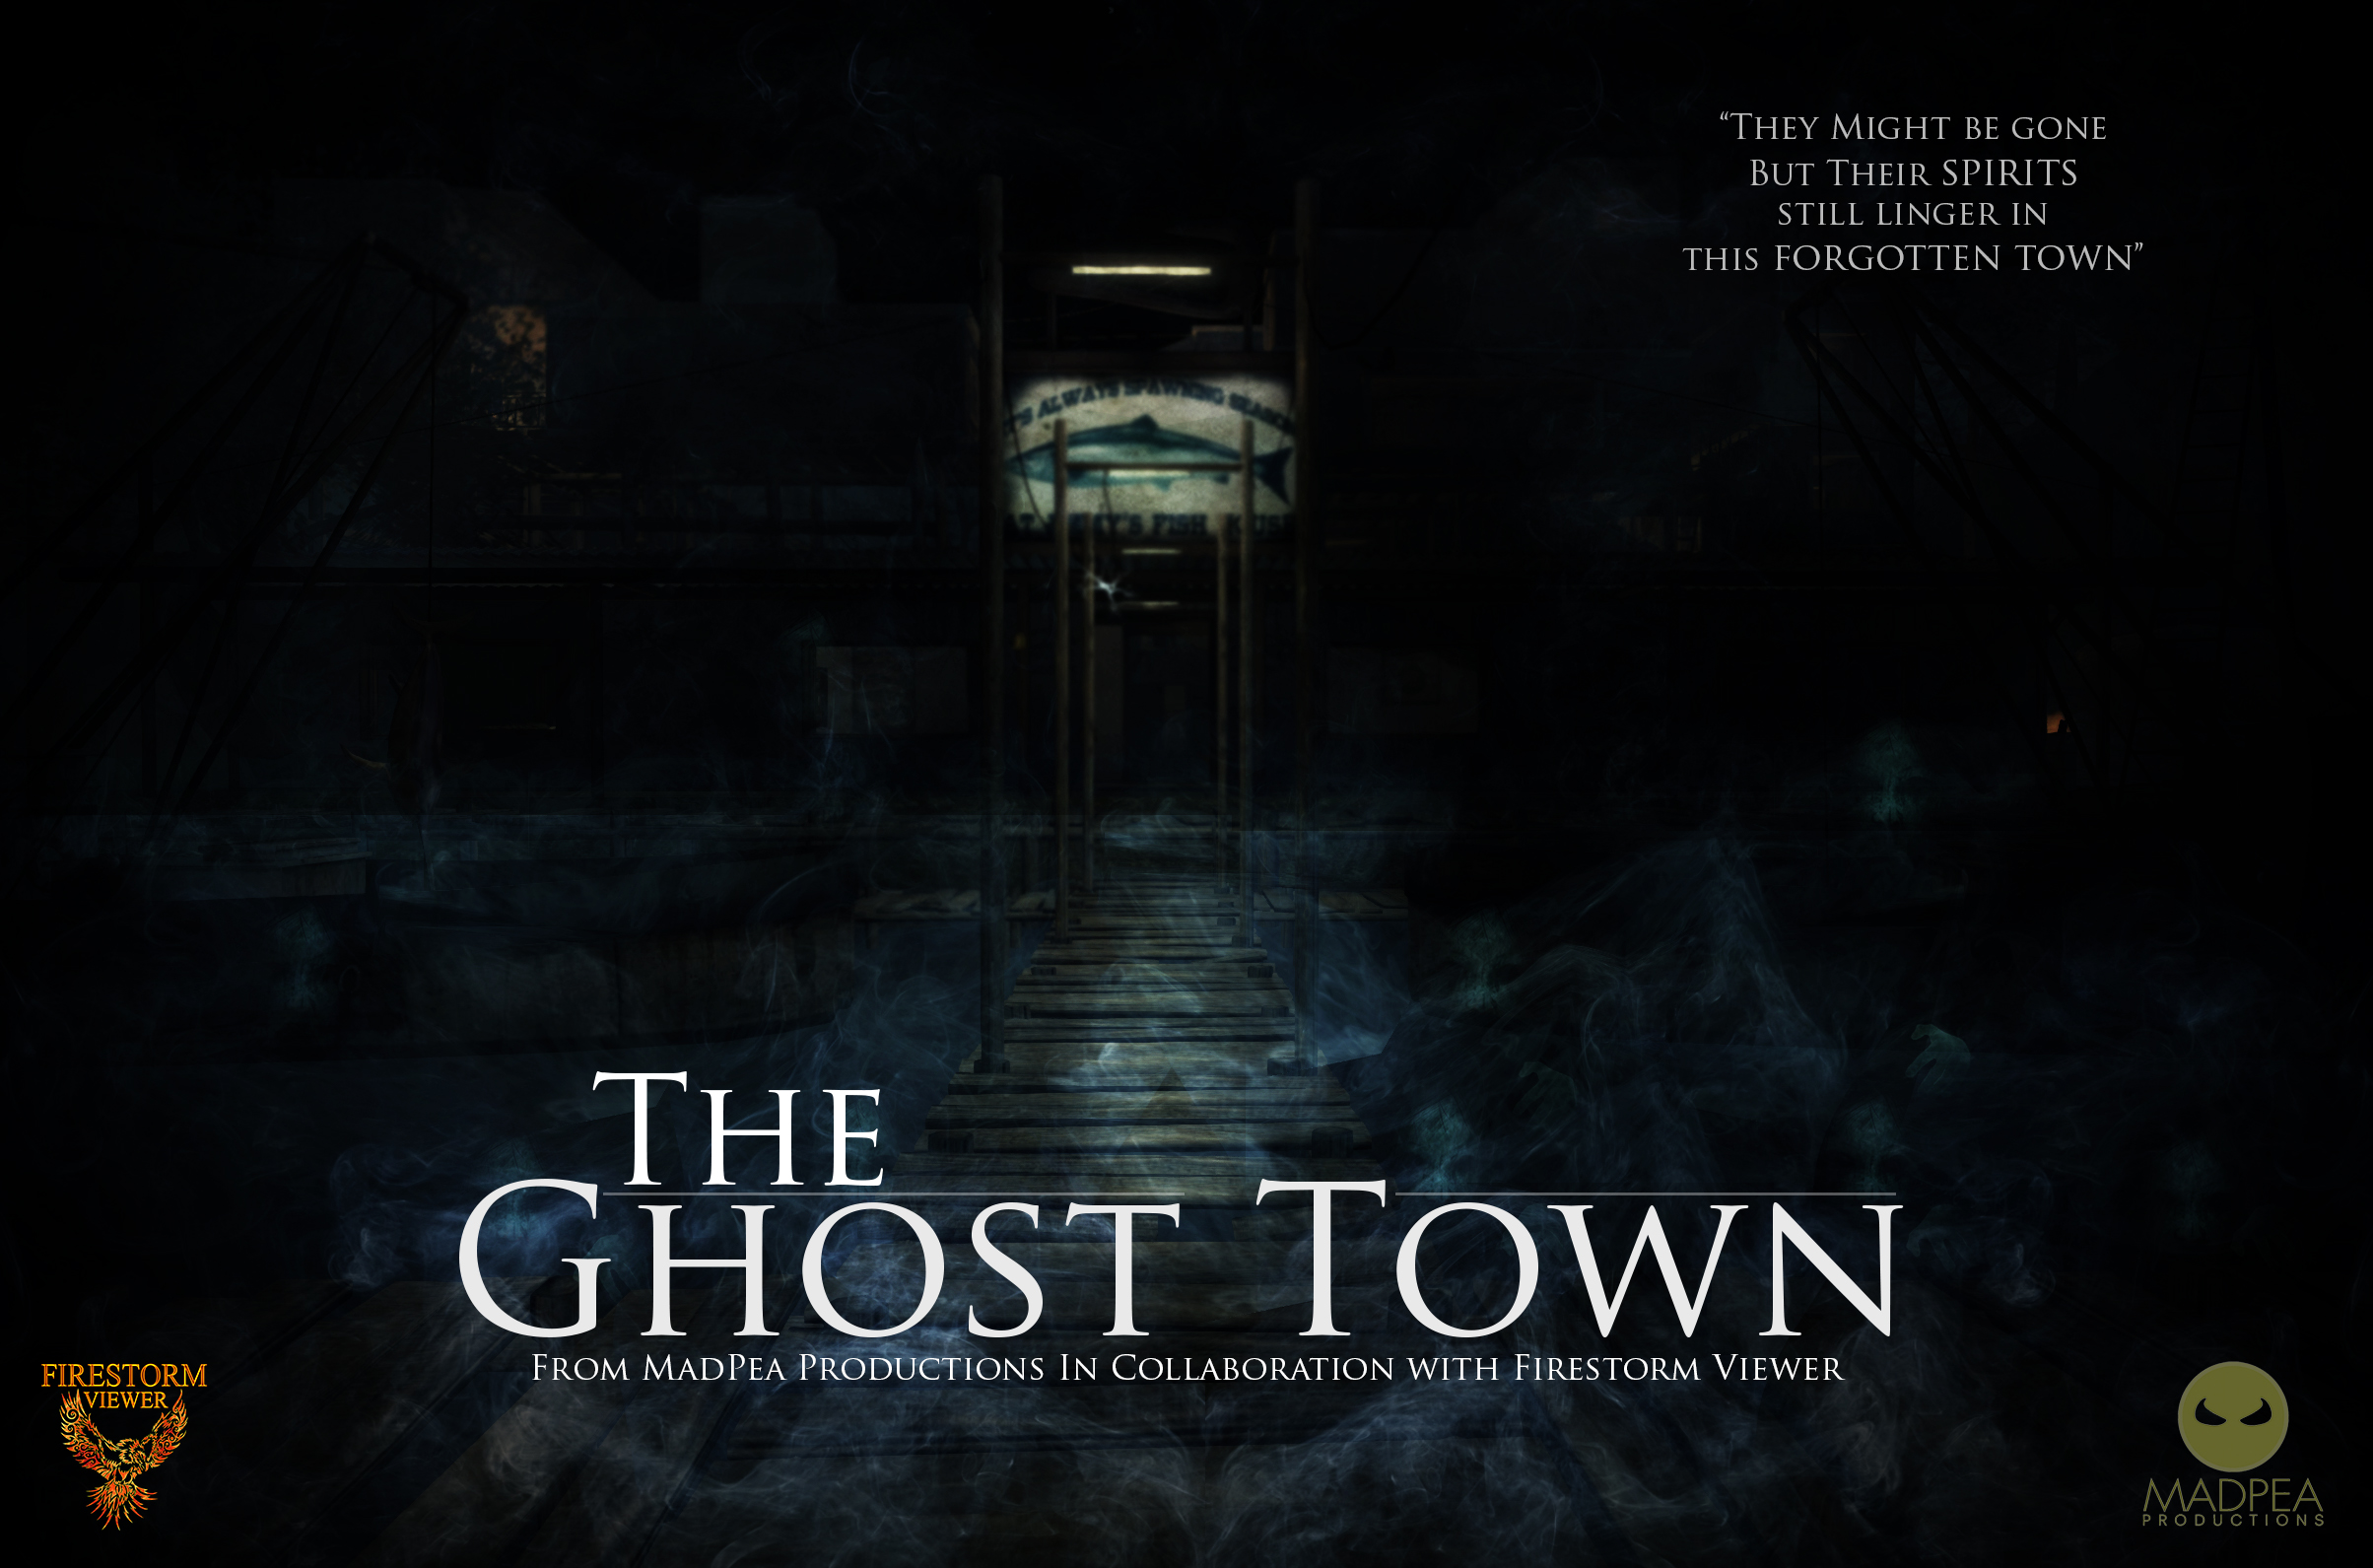 https://madpea.files.wordpress.com/2015/12/the-ghost-town-poster-high-res.jpg